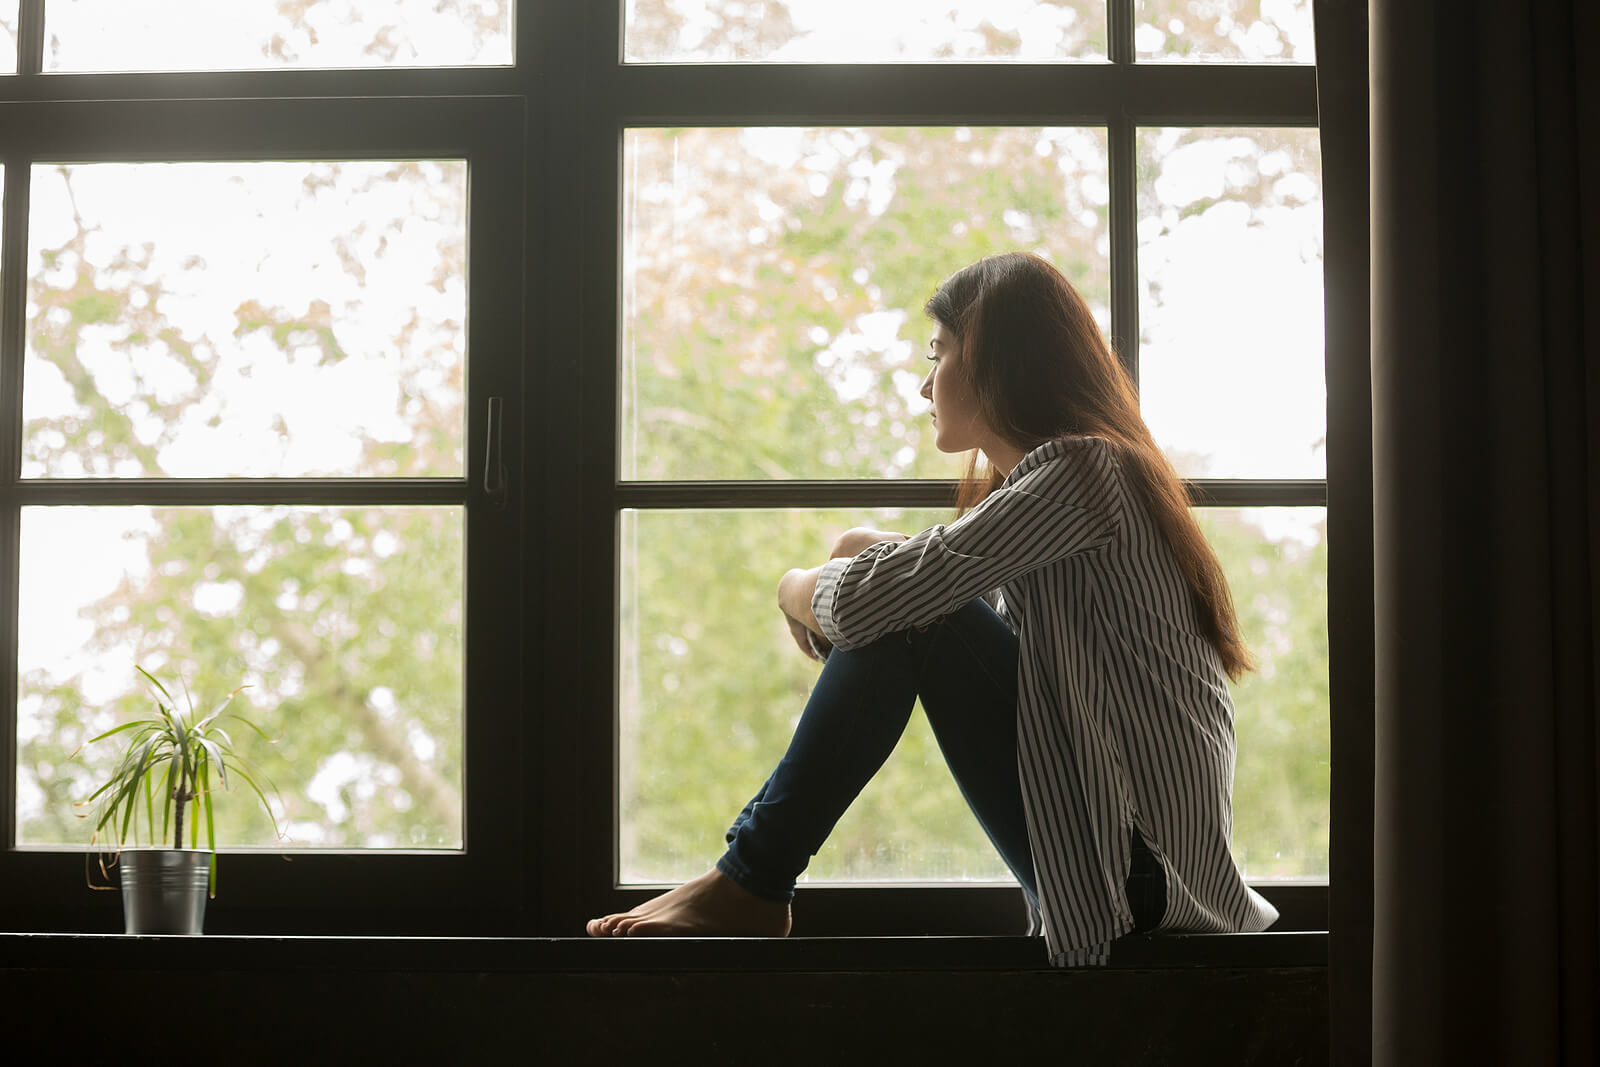 A woman sits near a window looking outside. Want to work through the emotional abuse you have dealt with in Austin, TX? Our trauma therapist can help move forward. Call today!